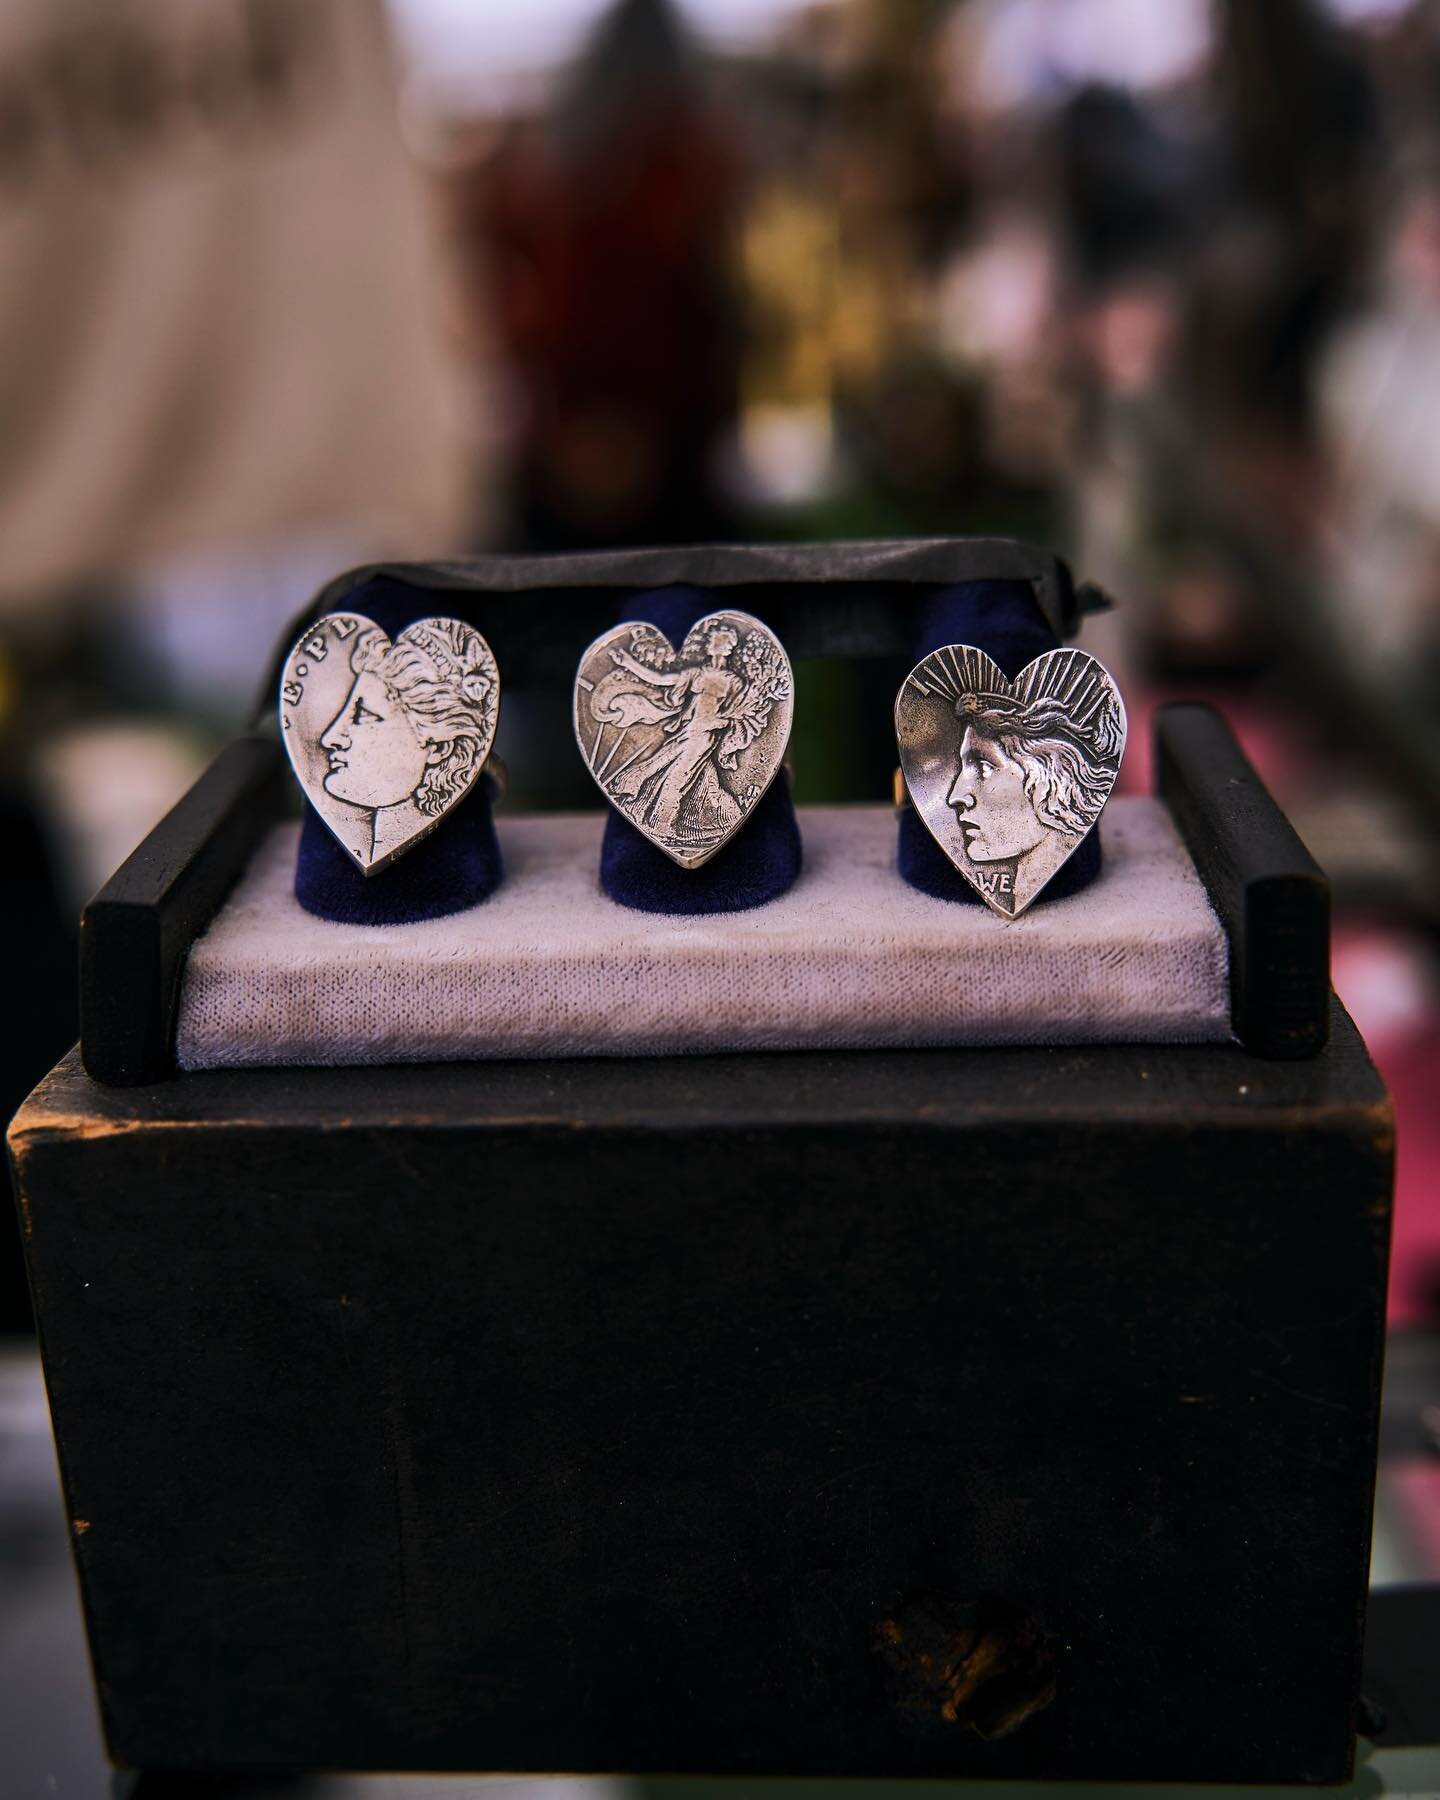 Lady Liberty Hearts Rings.
Impromptu photoshoot at Grand Bazaar last week with
the talented  @graceannajohnson 📷.
DM  me anytime 😍